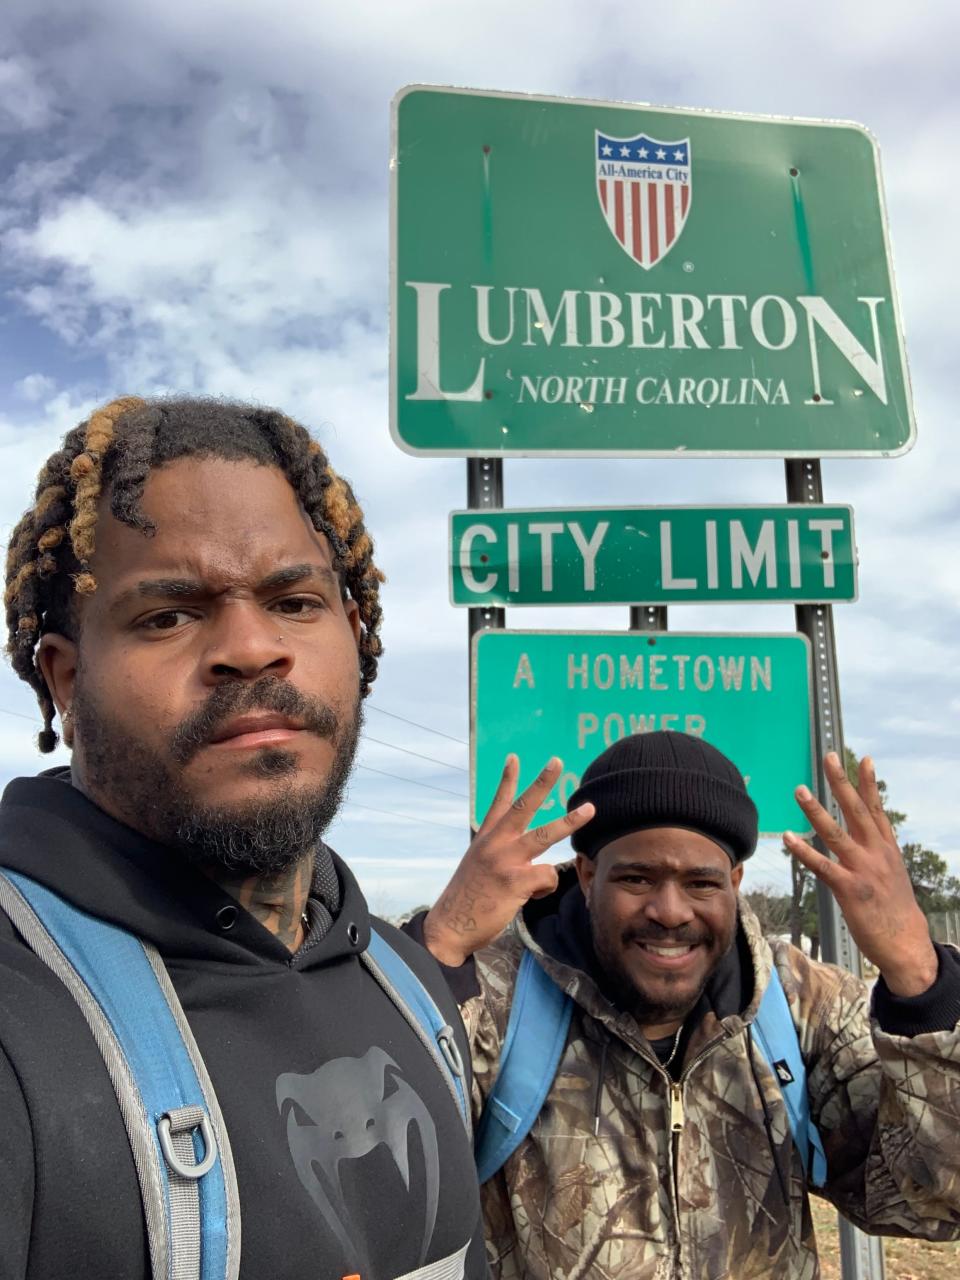 Twins Davon and Tavon Woods have walked in several different states, including North Carolina, and they have talked to foster kids along the way.